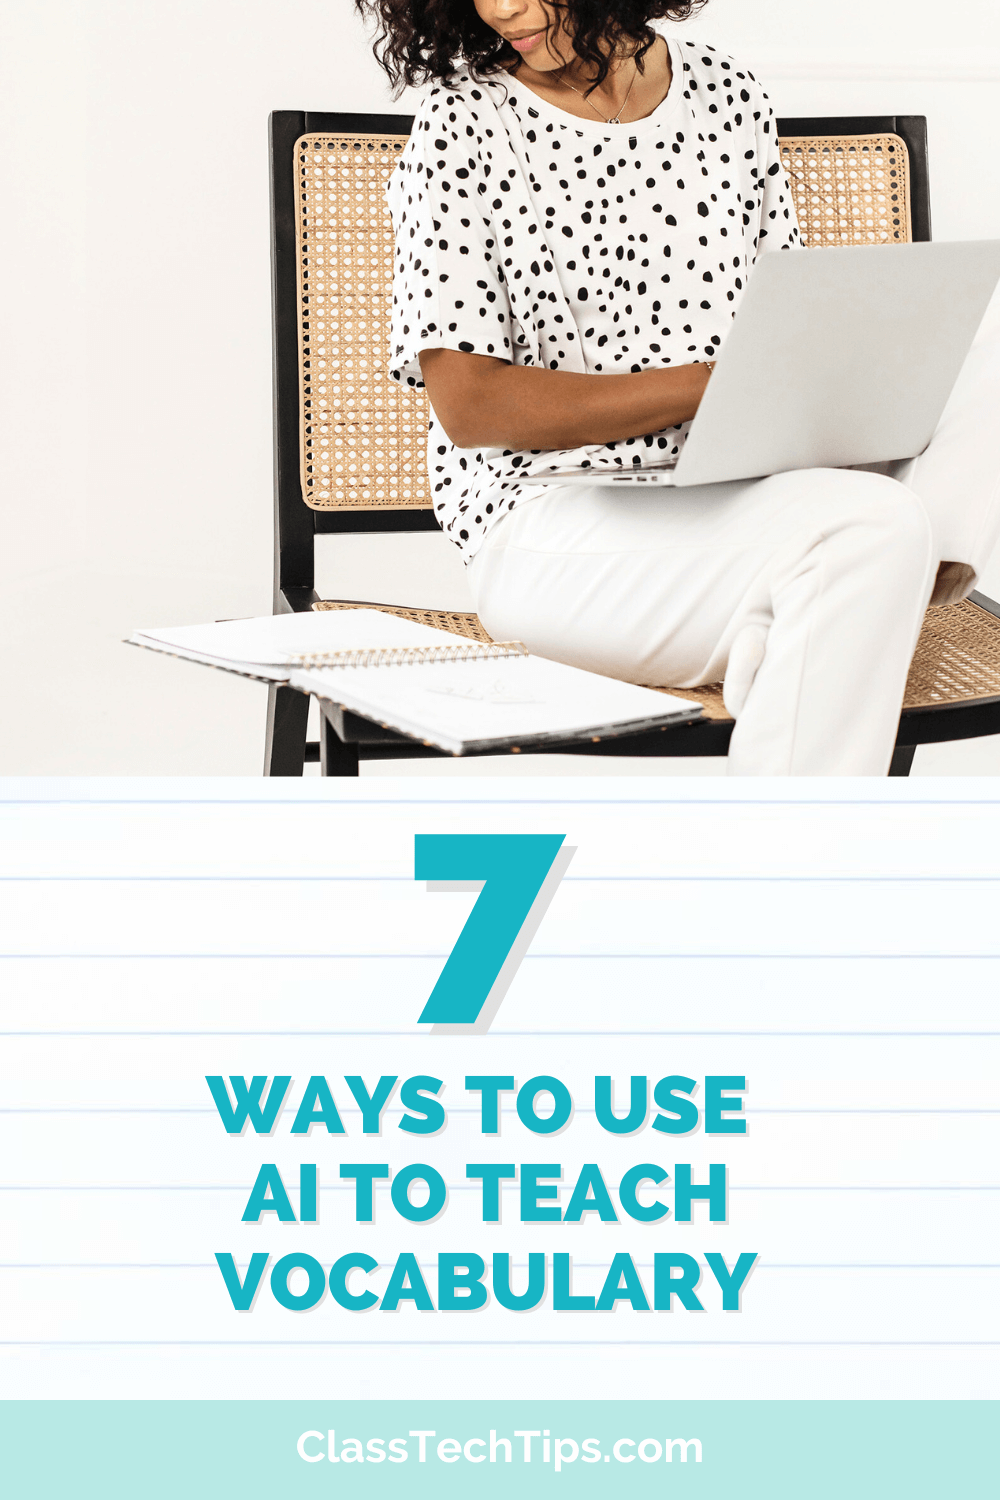 Image of a teacher working on a laptop with a notebook beside them. The image is titled "7 Ways to Use AI to Teach Vocabulary," with the website ClassTechTips.com displayed below.